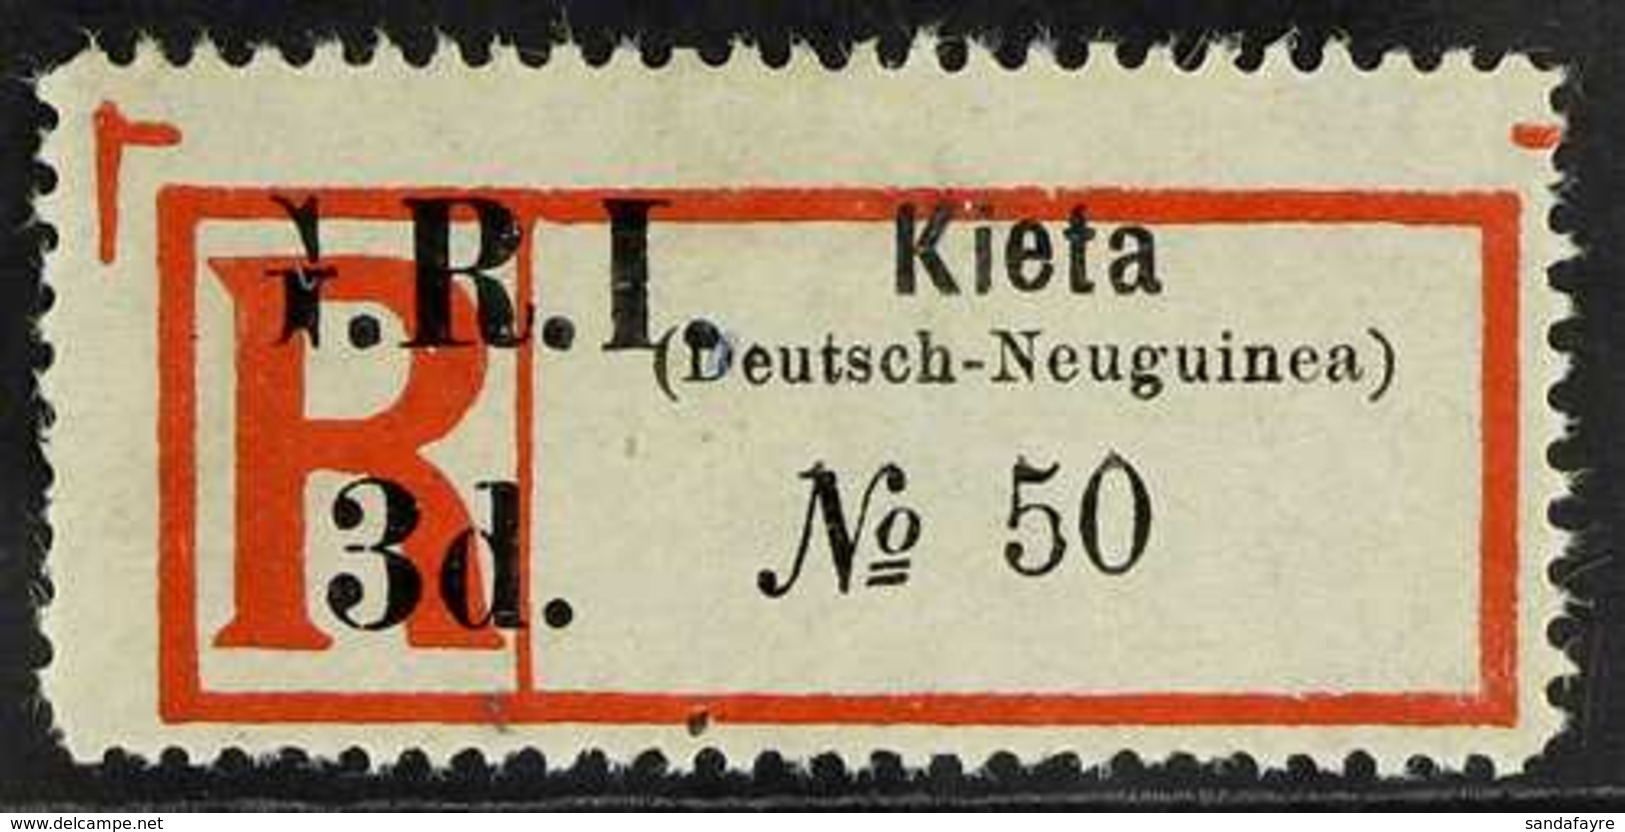 1915 3d On Kieta Registration Label Provisional Issue With "G" PARTIALLY OMITTED, SG 38 Variety, Very Fine Unused. Rare. - Papua New Guinea